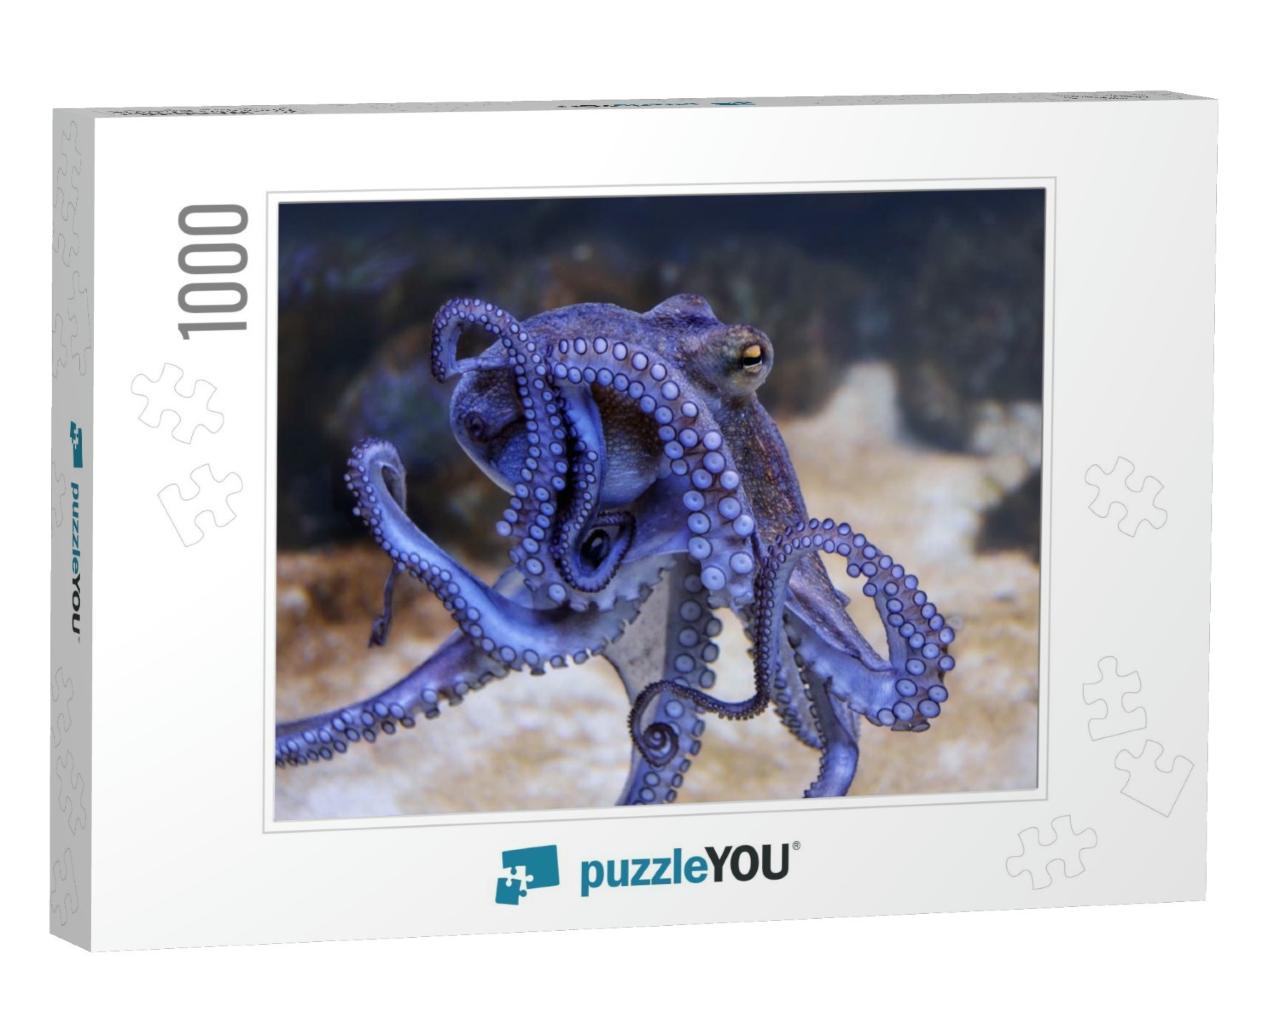 Octopus in an Aquarium, Closeup View... Jigsaw Puzzle with 1000 pieces